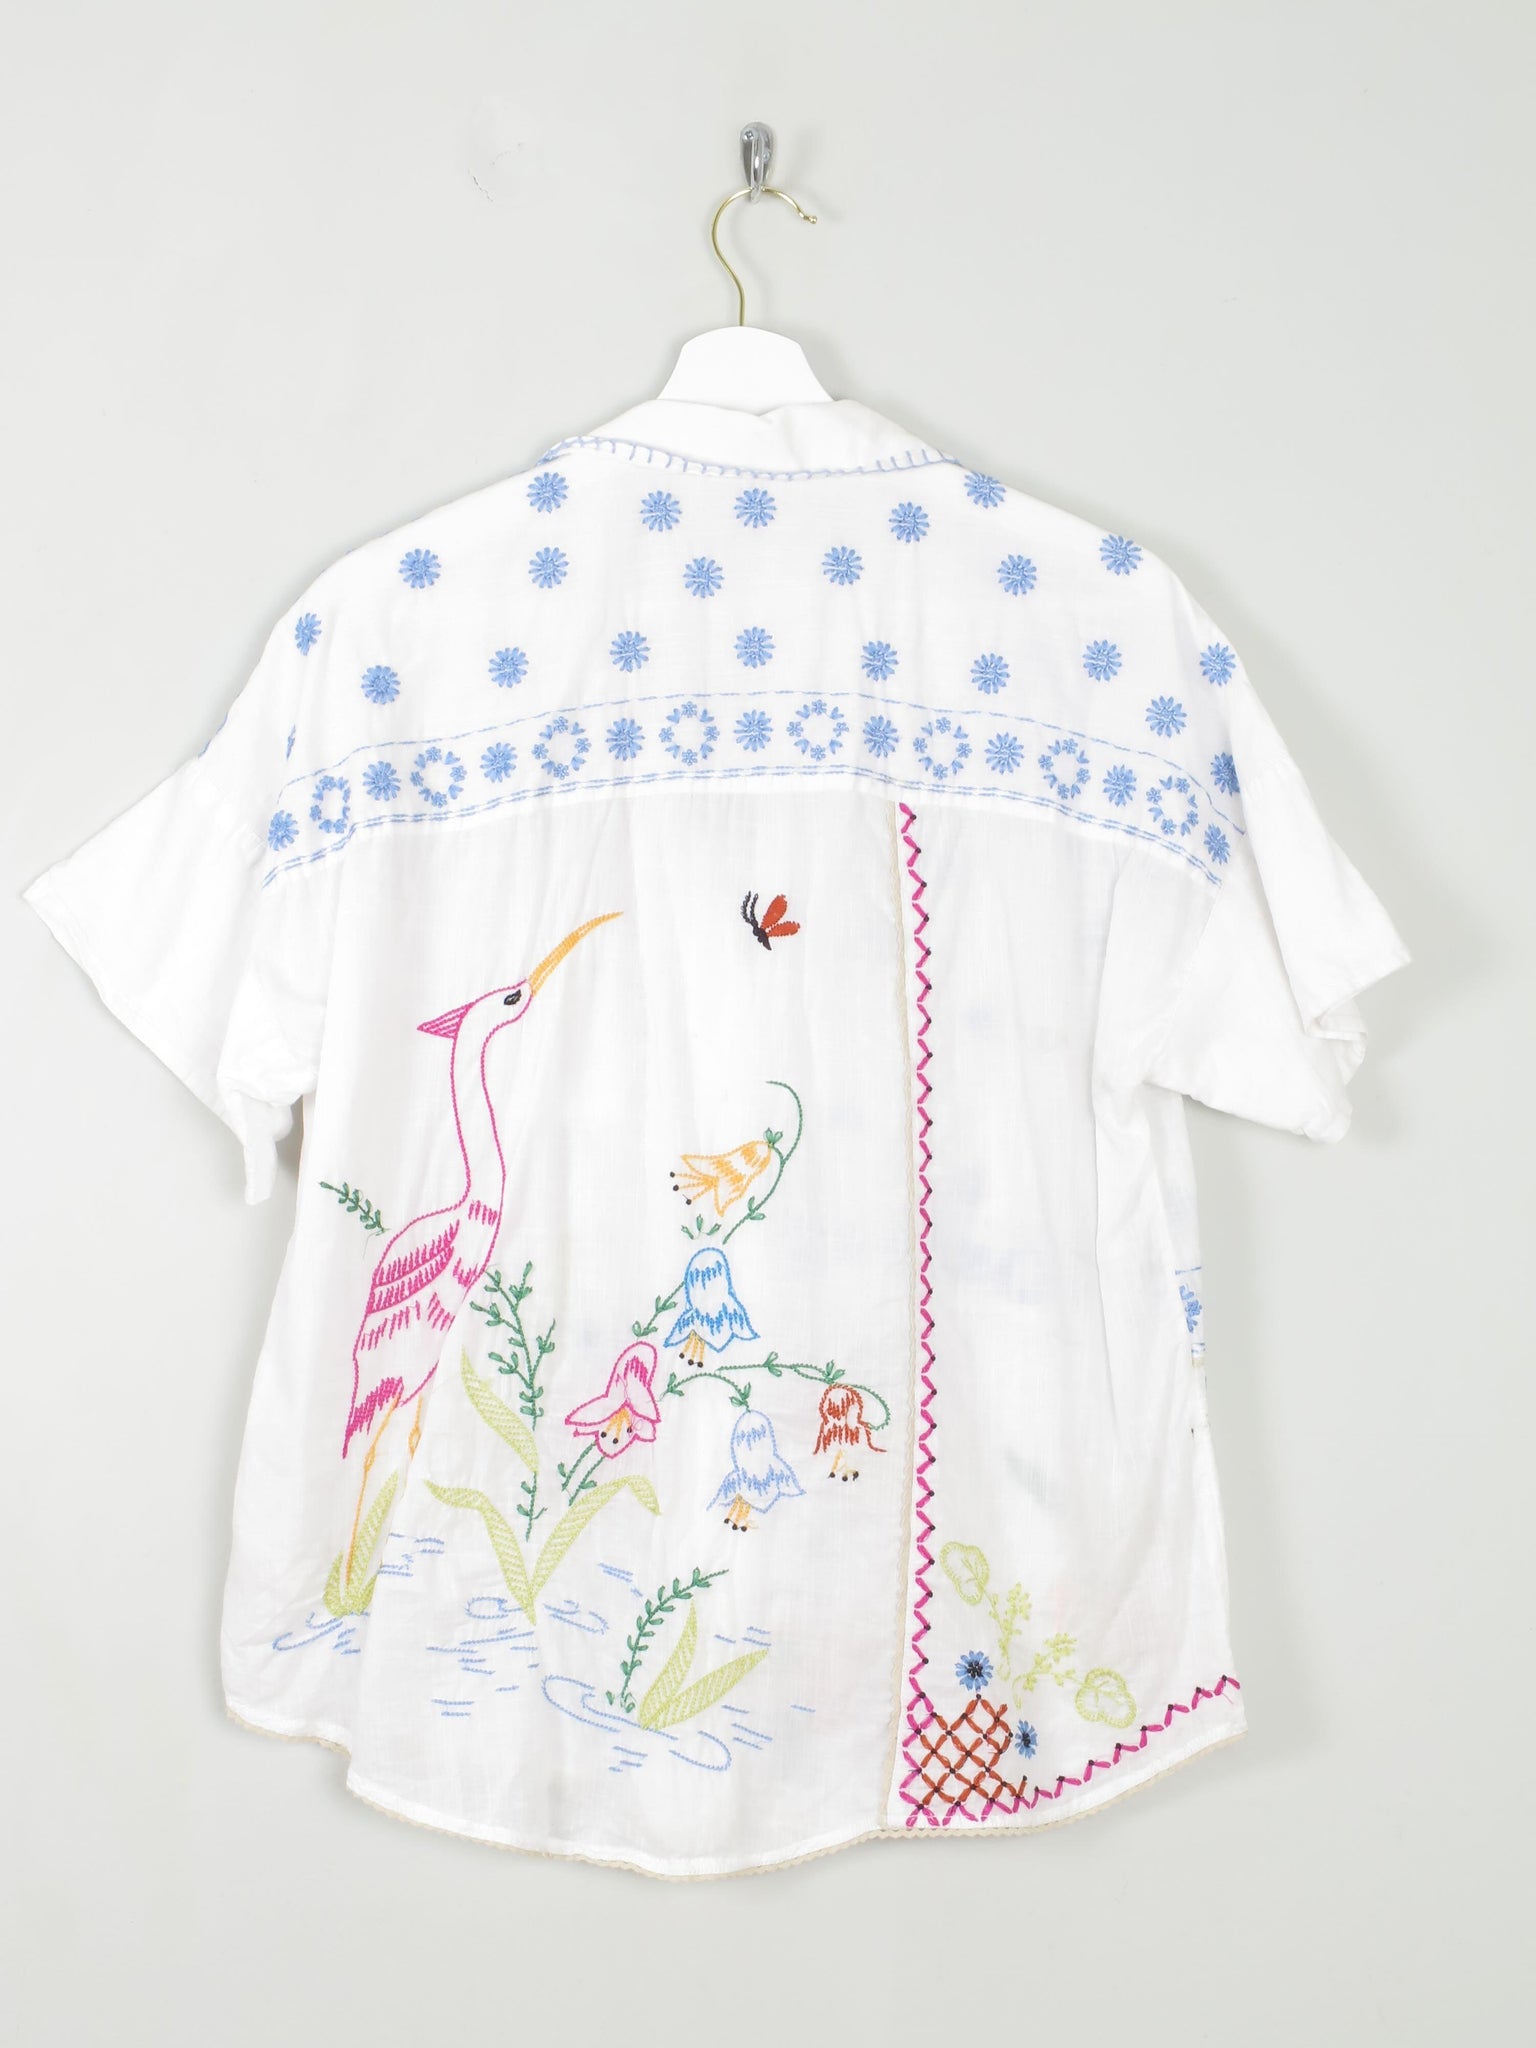 Women's Embroidered Blouse Pilcro By Anthropologie S/M